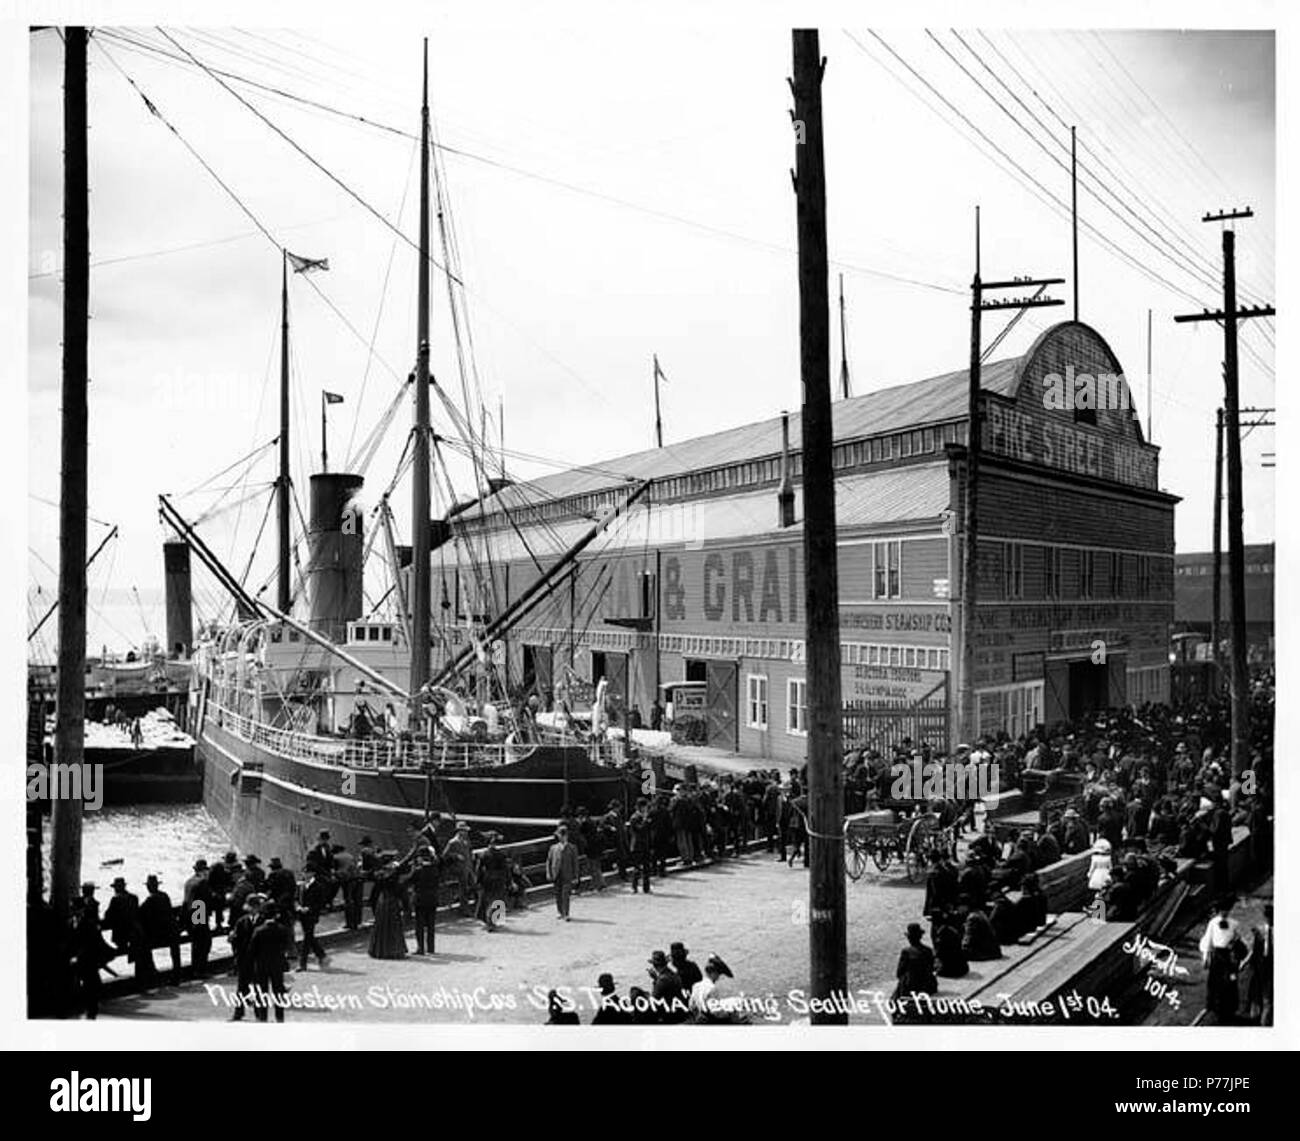 . English: Steamship TACOMA departing for Nome, Pike Street Wharf, Seattle, 1904 . English: Caption on image: Northwestern Steamship Co's 'S.S. Tacoma' leaving Seattle for Nome, June 1st 04. Nowell 1014 Subjects (LCTGM): Ships--Washington (State)--Seattle; Piers & wharves--Washington (State)--Seattle Subjects (LCSH): Tacoma (Ship); Pike Street Wharf (Seattle, Wash.) This pier shed, Pier 8 / Pike Street Wharf / Pike Street Pier, built 1896, was replaced in 1905 by the current structure known since the 1940s as Pier 59, now housing the Seattle Aquarium. (HistoryLink gives a somewhat different se Stock Photo